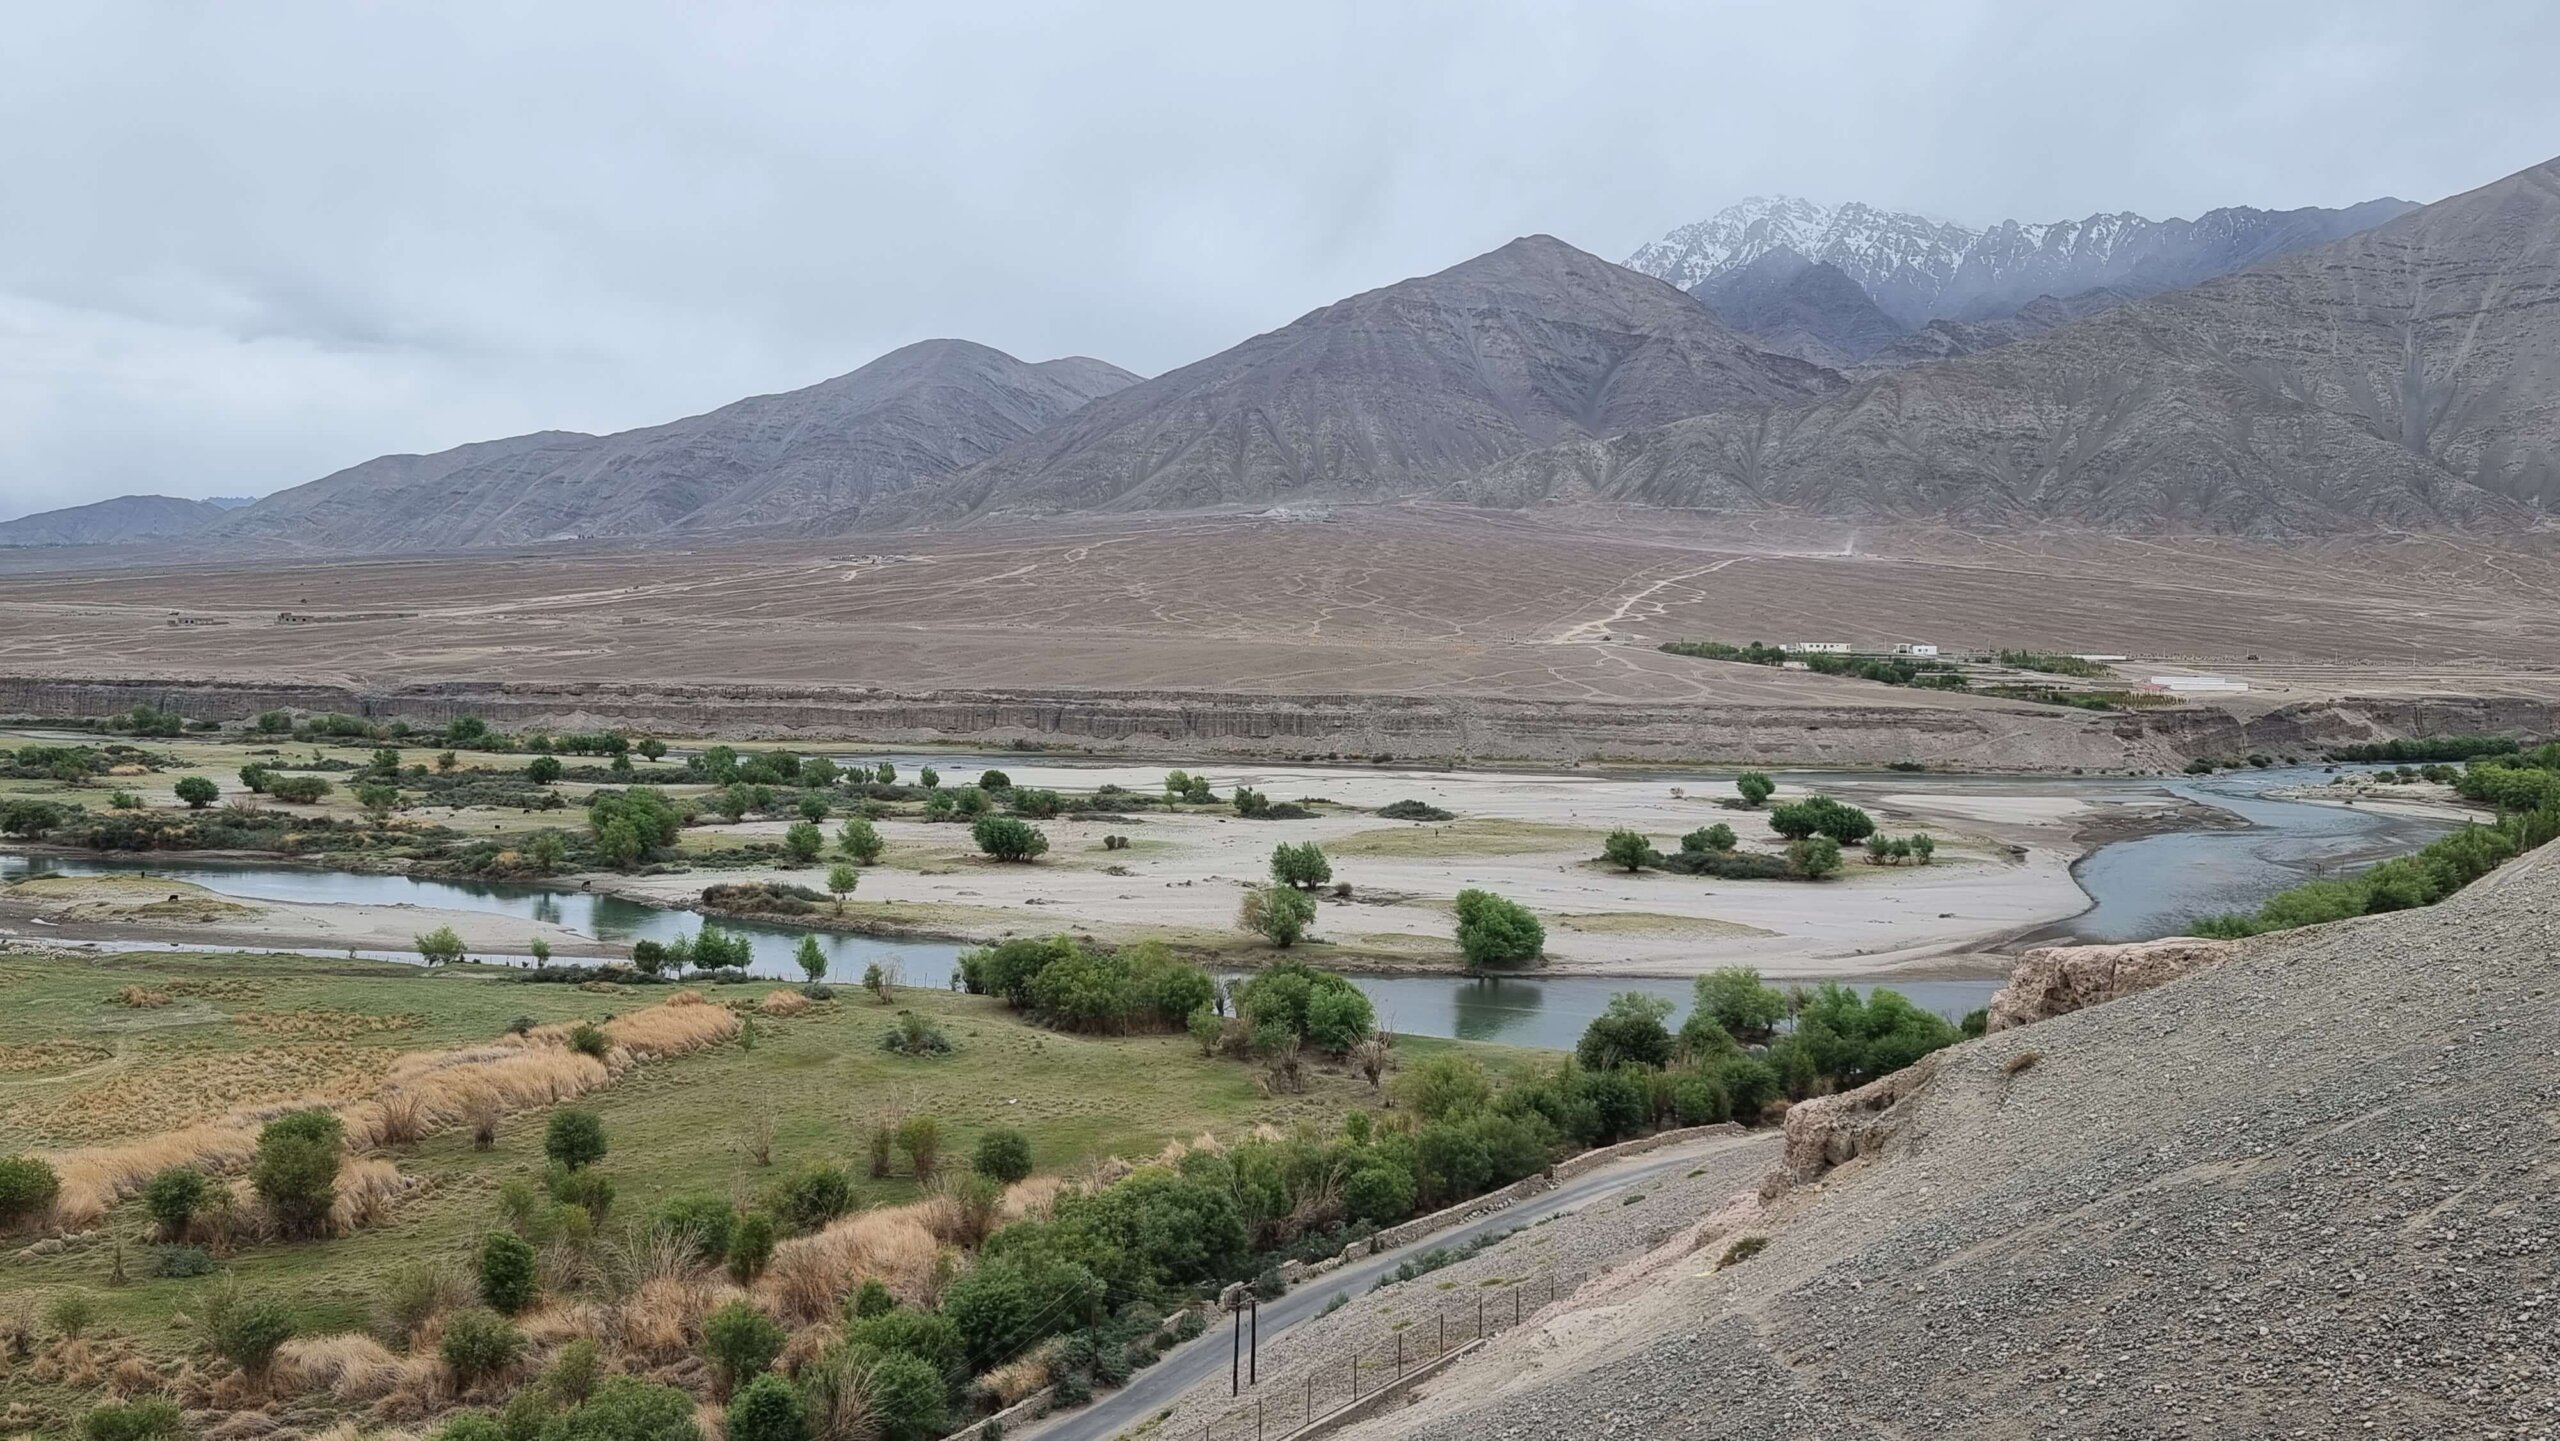 A gorgeous panoramic view of the Indus river, snow-clad peaks, Stok village & Pharka village